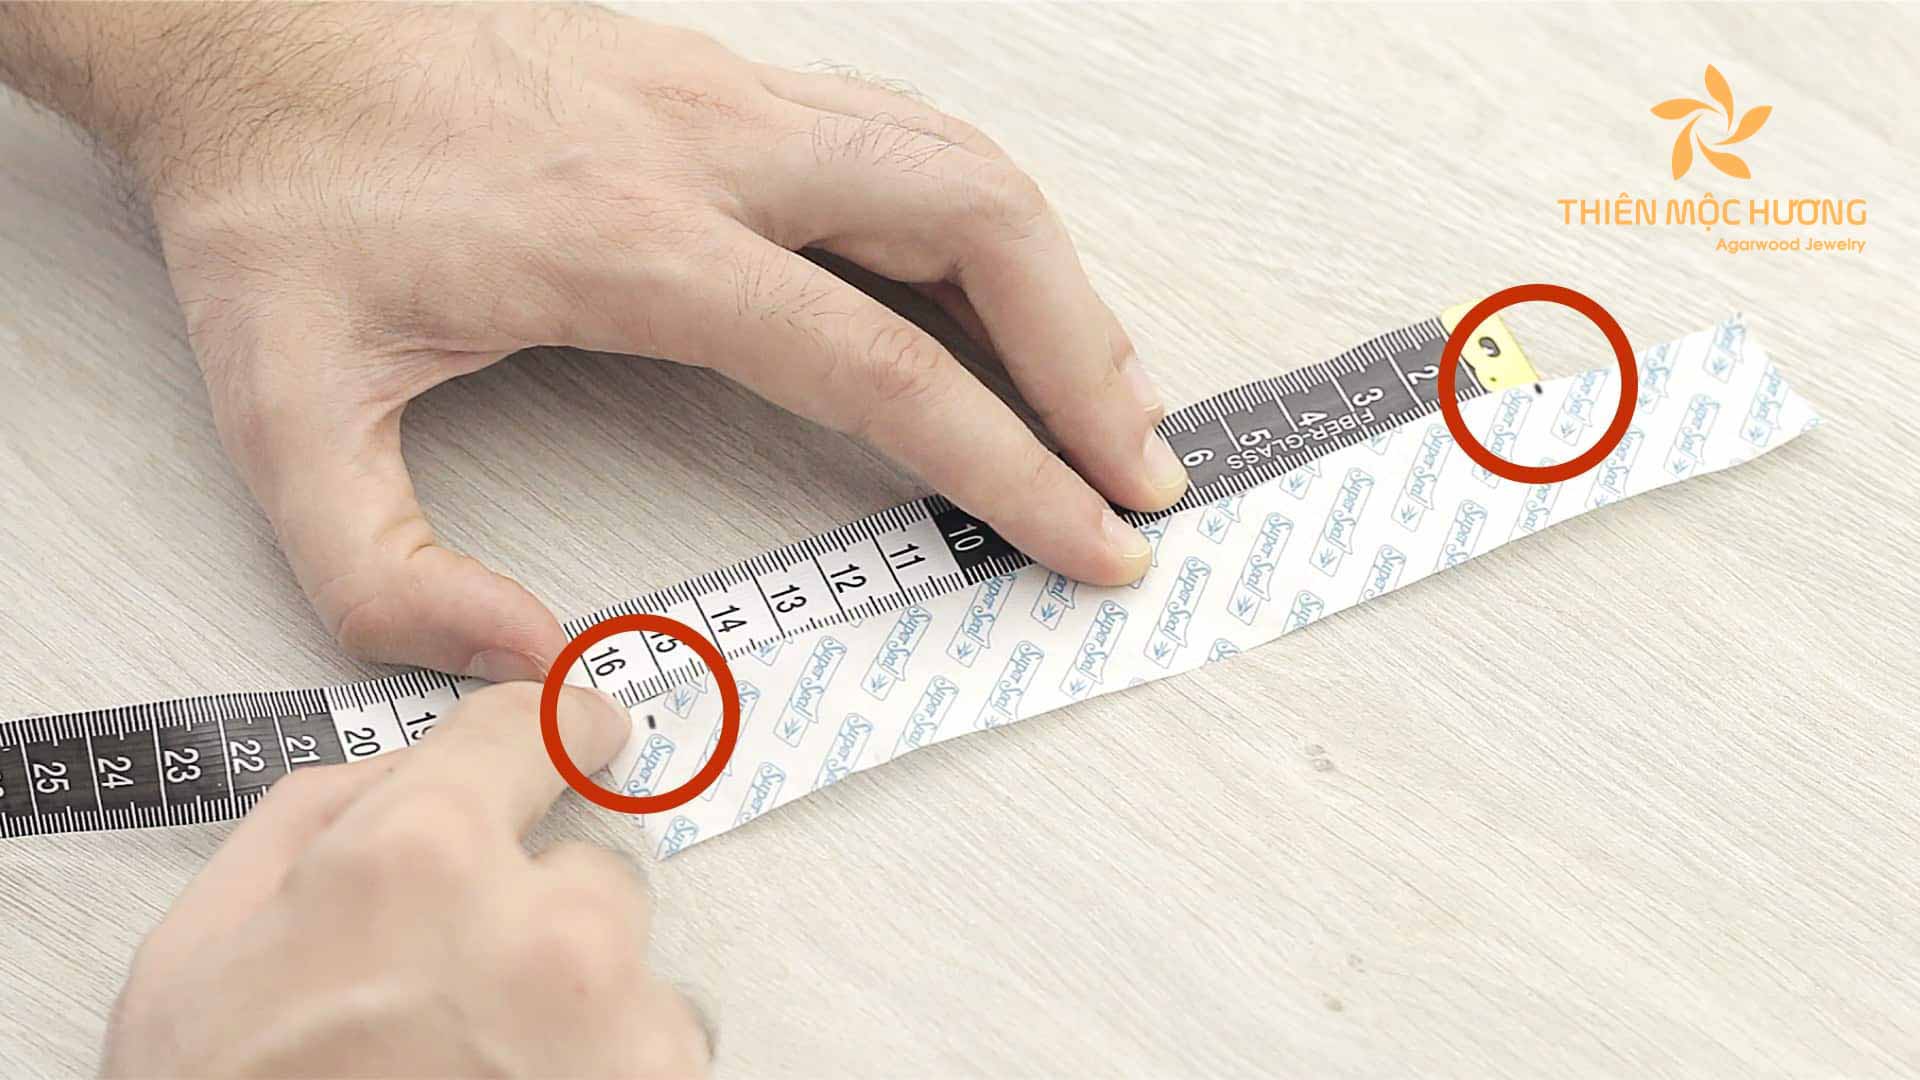 A ruler or another measuring device is essential